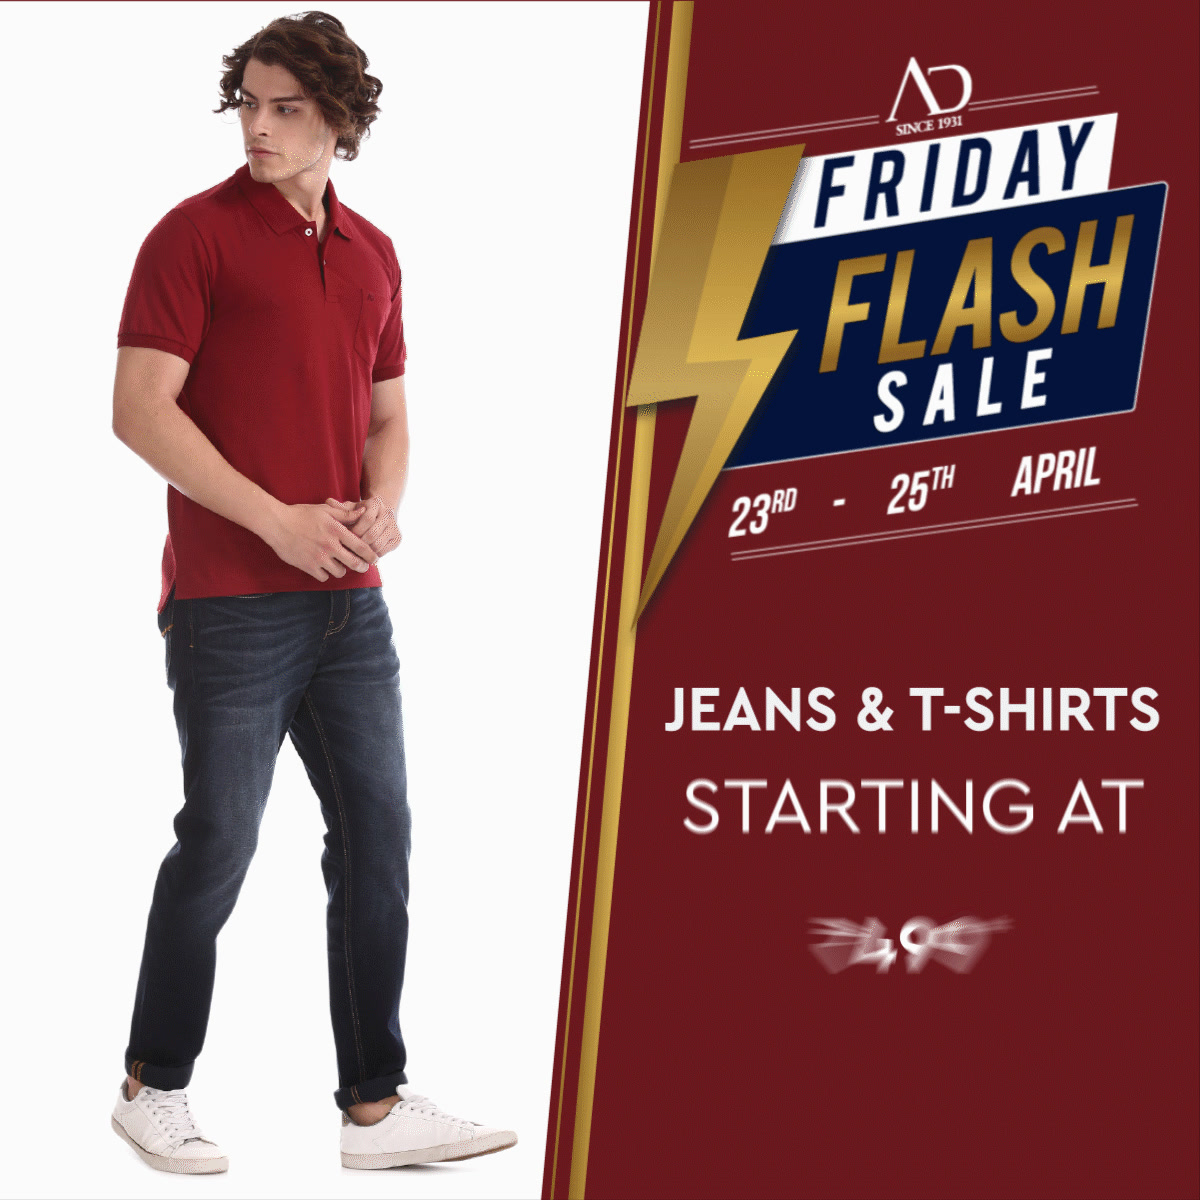 Get all set to wear your swag with Jeans & T-Shirts starting at just Rs.499*, only on 23rd, 24th & 25th April!  Shop now at arvind.nnnow.com

#ADbyArvind #ADfashion #FashioningPossibilities #FridayFlashSale #Menswear  #StayStylish  #Jeans #Tshirts #OfferAlert #FridayFashion #YayFriday